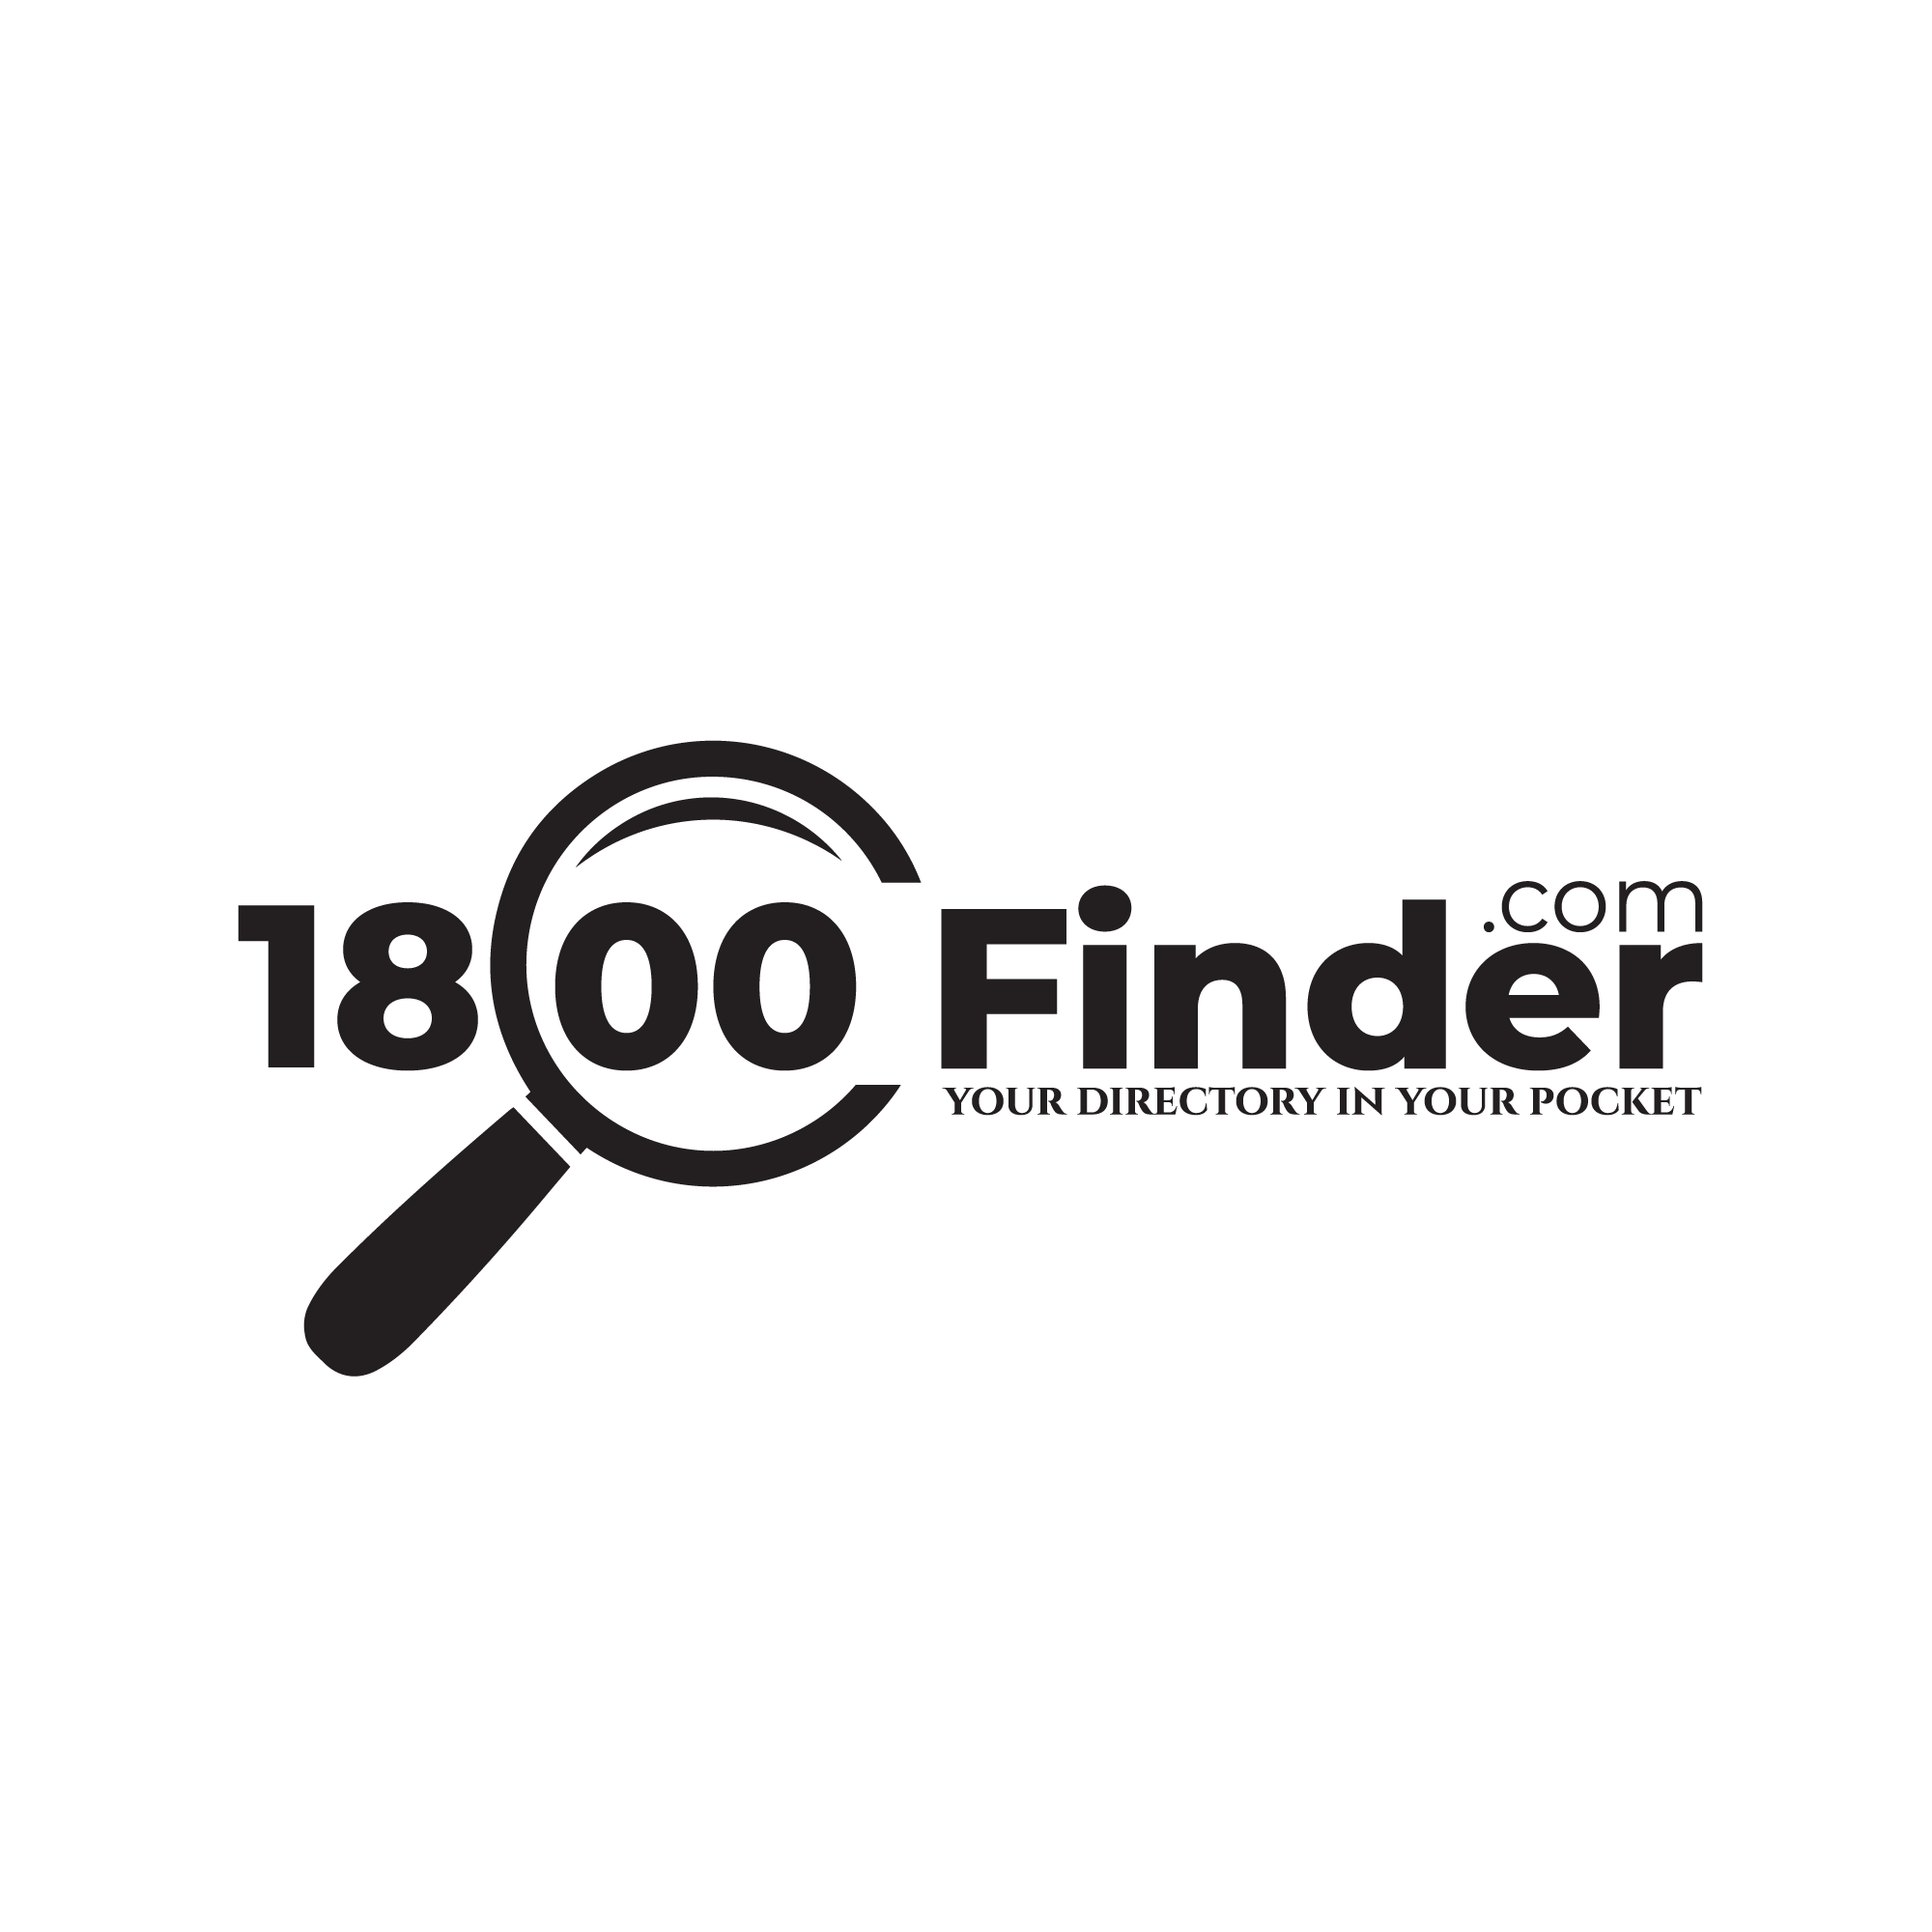 1800 finder | Business Directory profile avatar